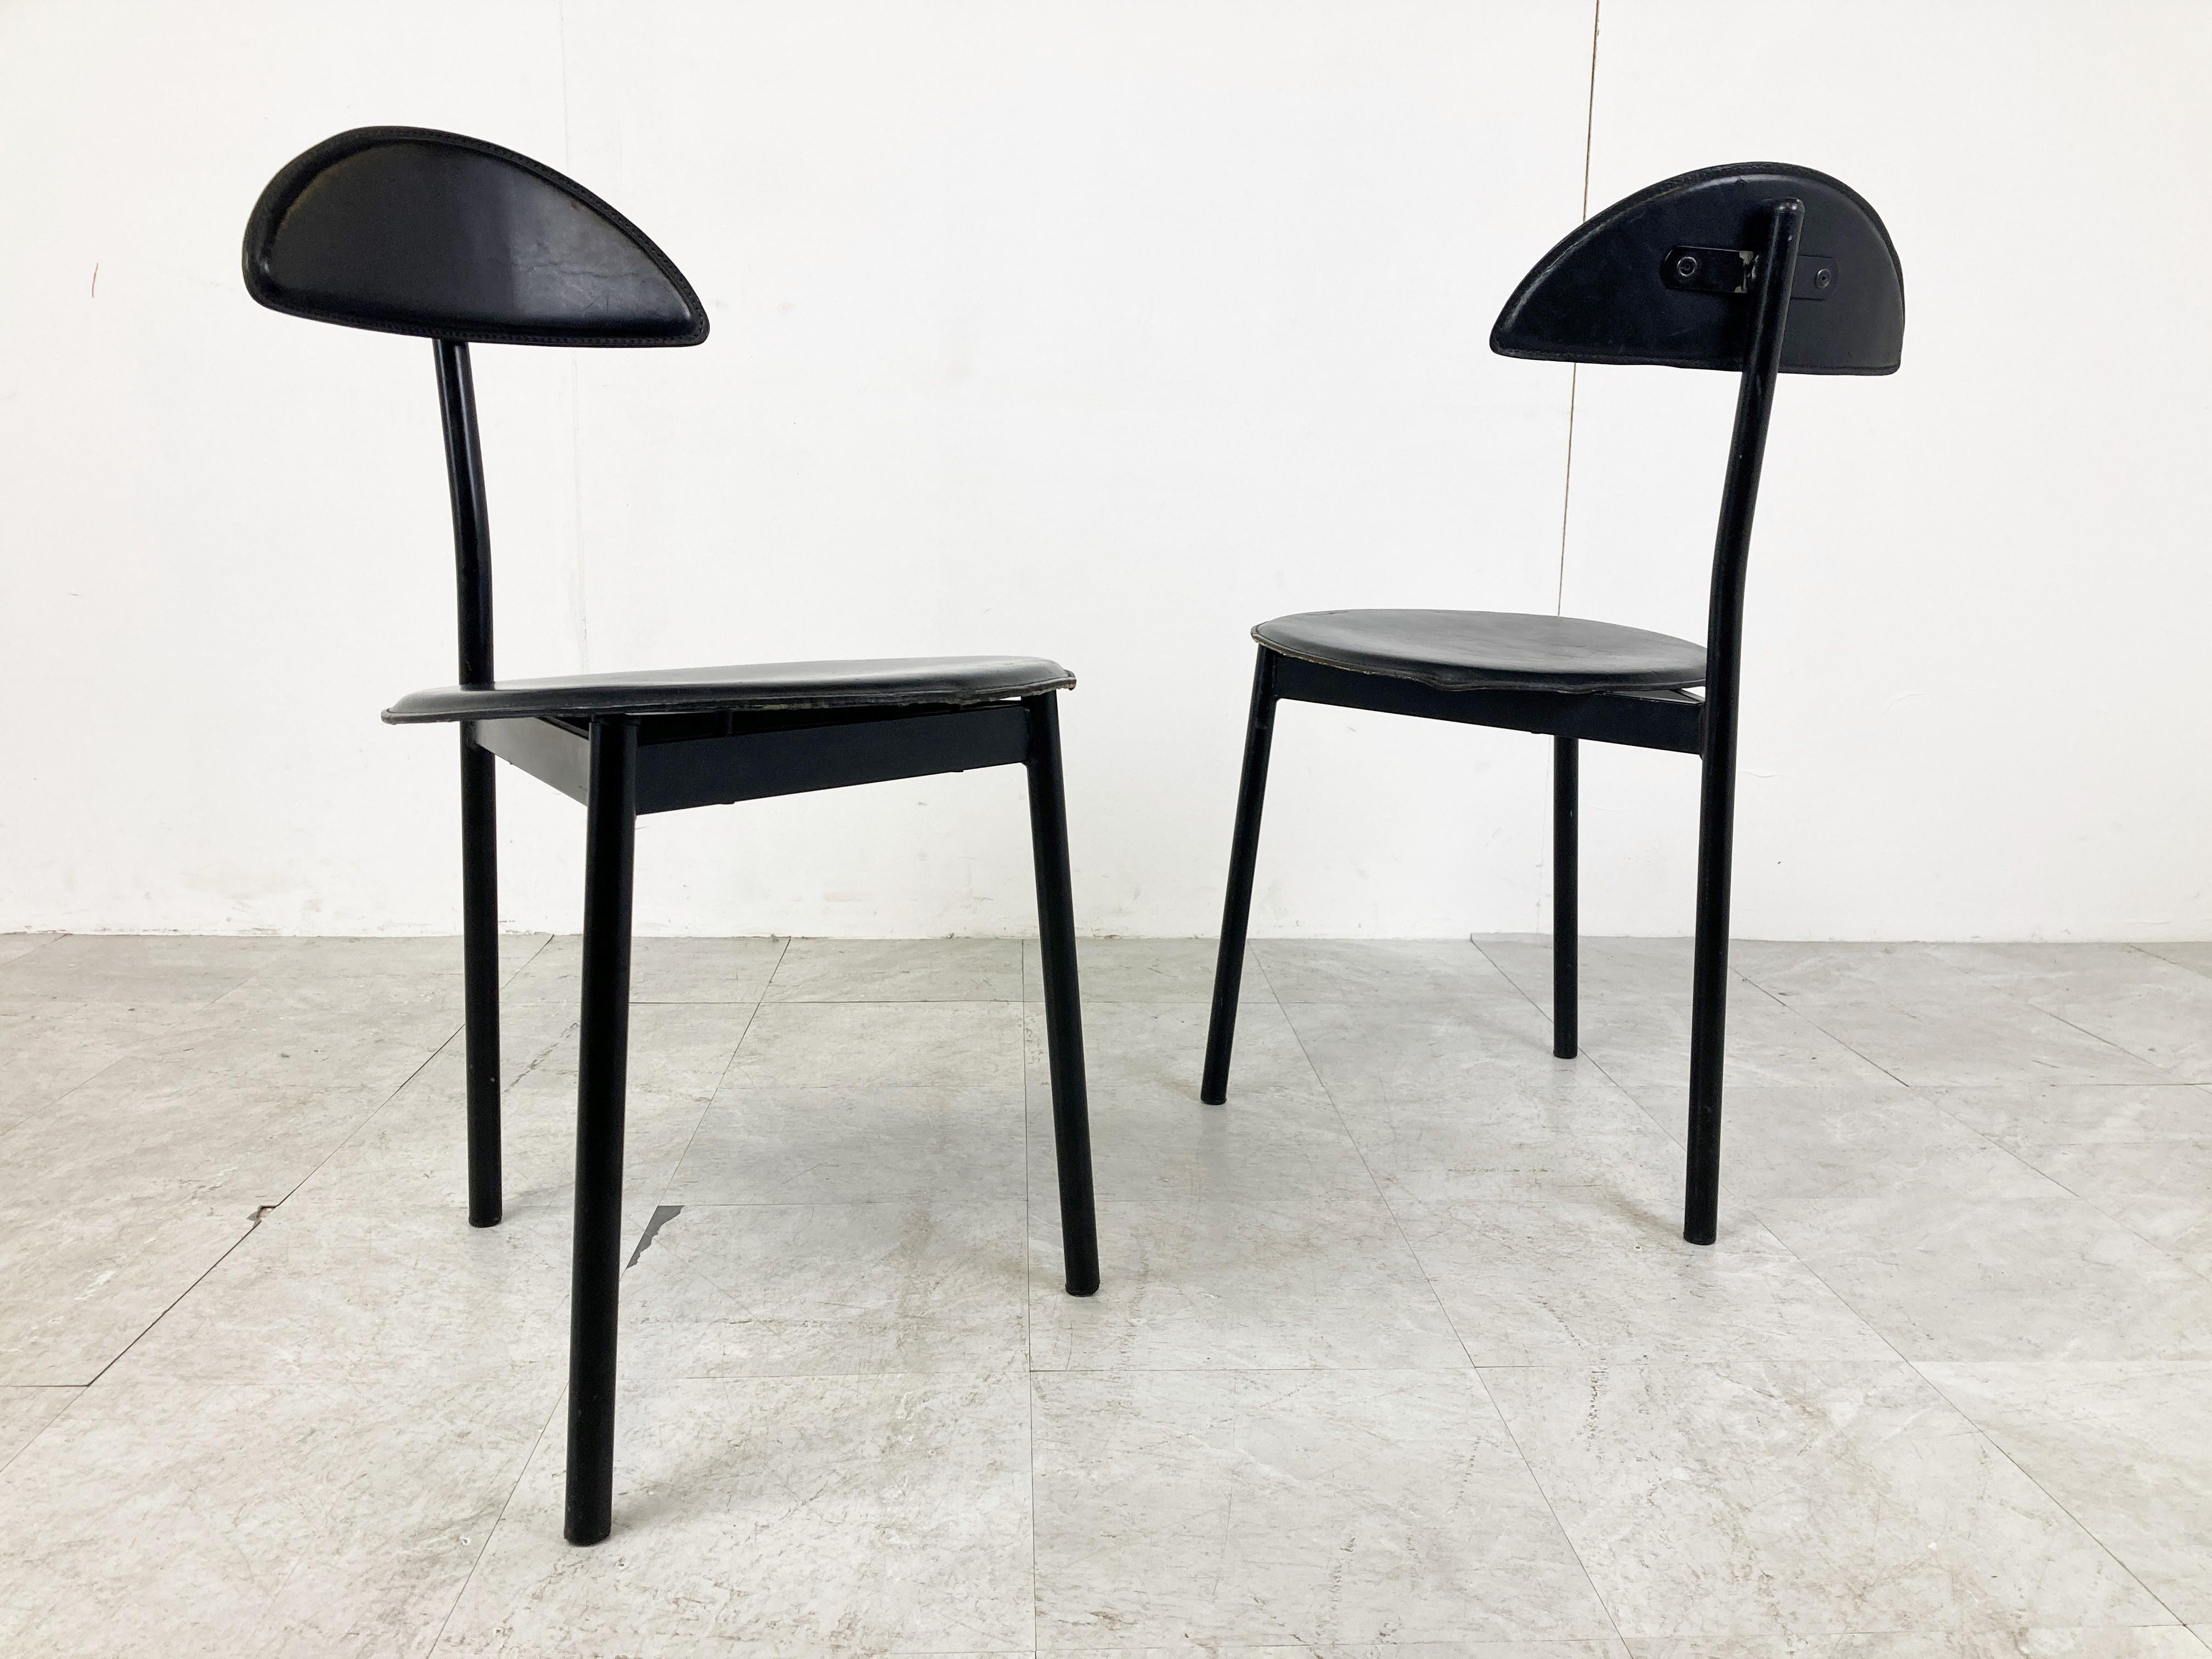 Set of 4 Post Modern Dining Chairs by Linea Veam, 1980s For Sale 2